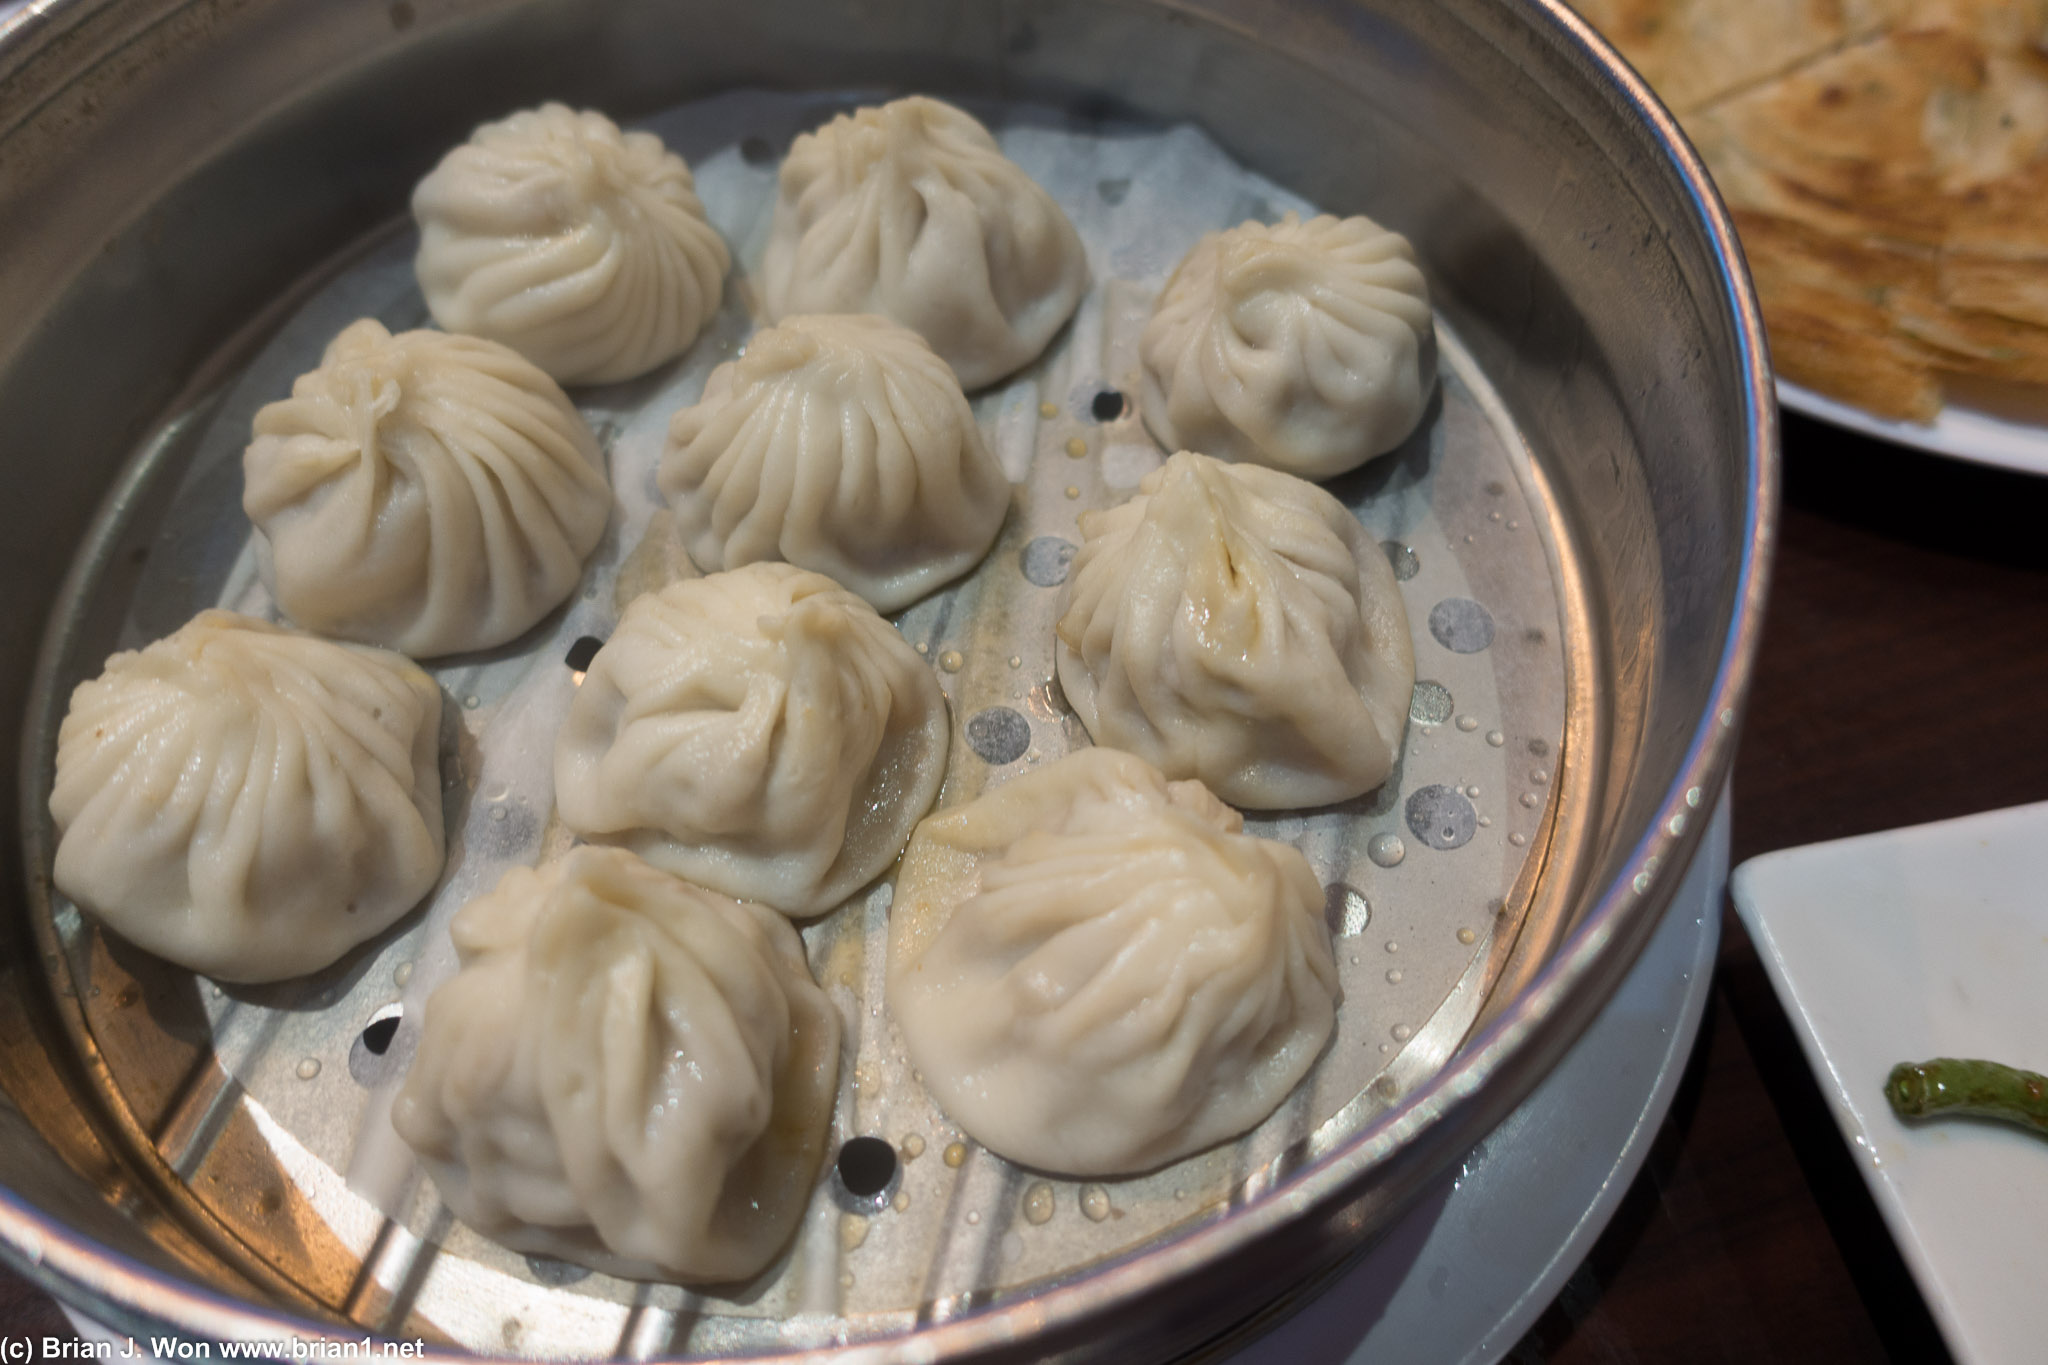 Xiao long bao. Getting pretty good here- close to DTF, but still not quite.